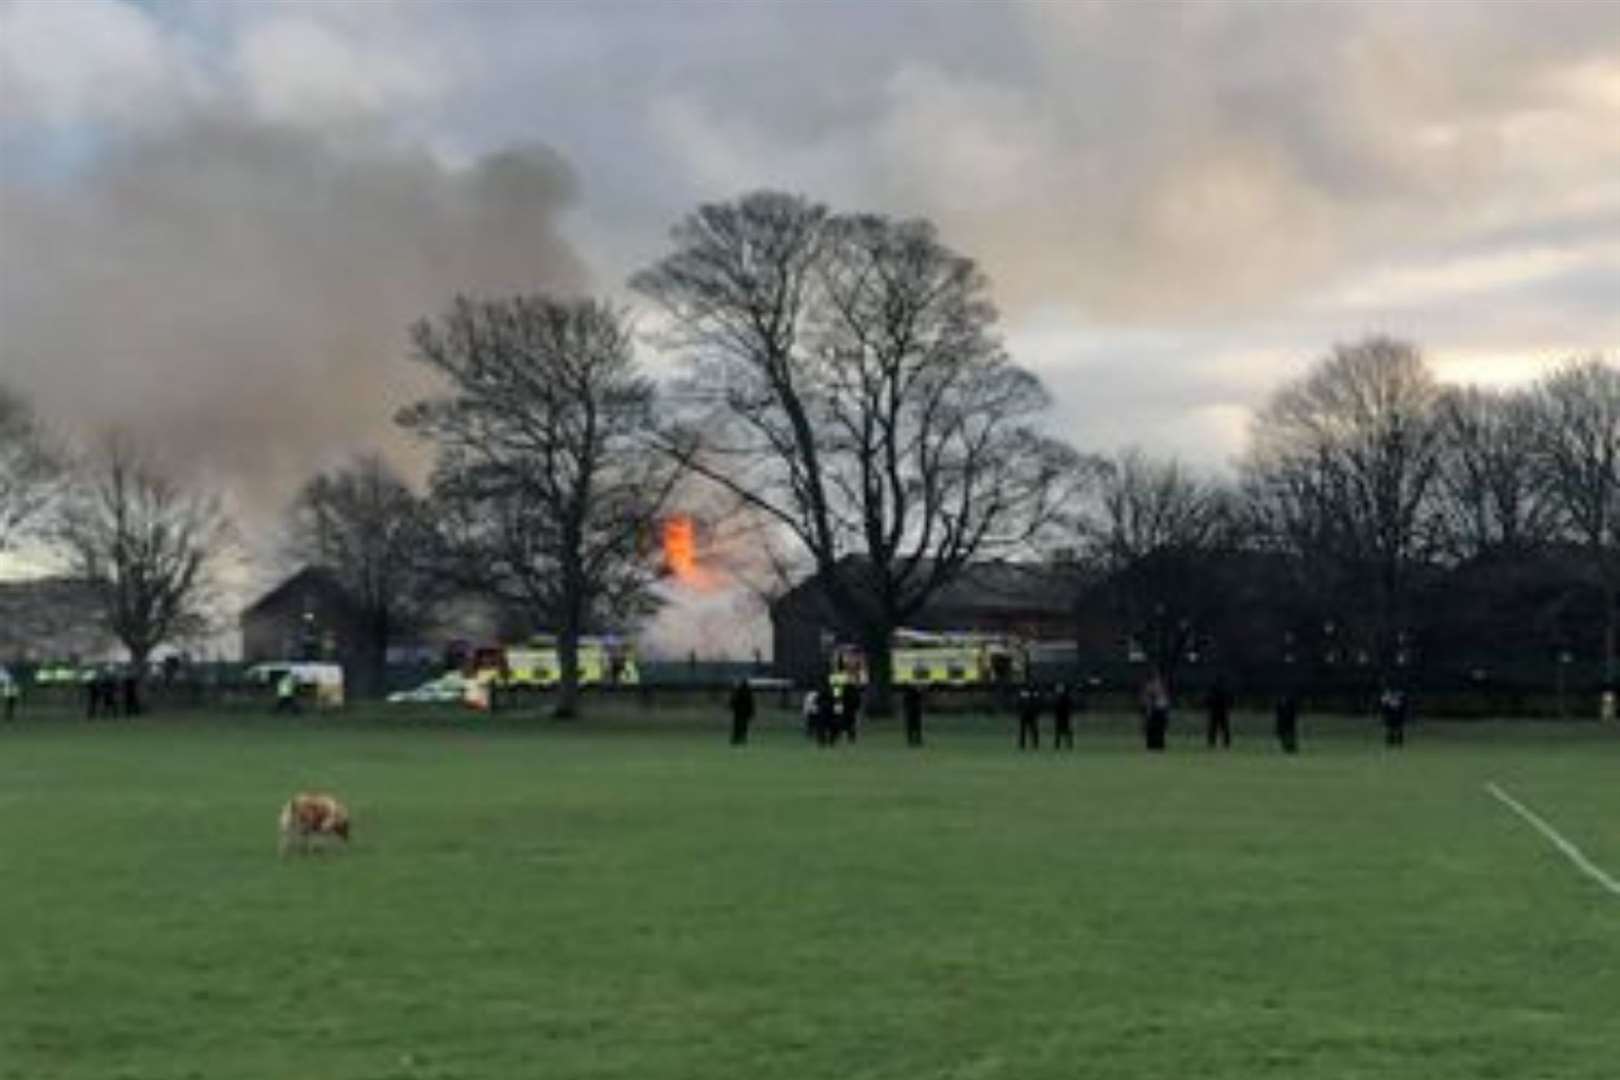 Flames and smoke could be seen at the barracks during the fire on January 29